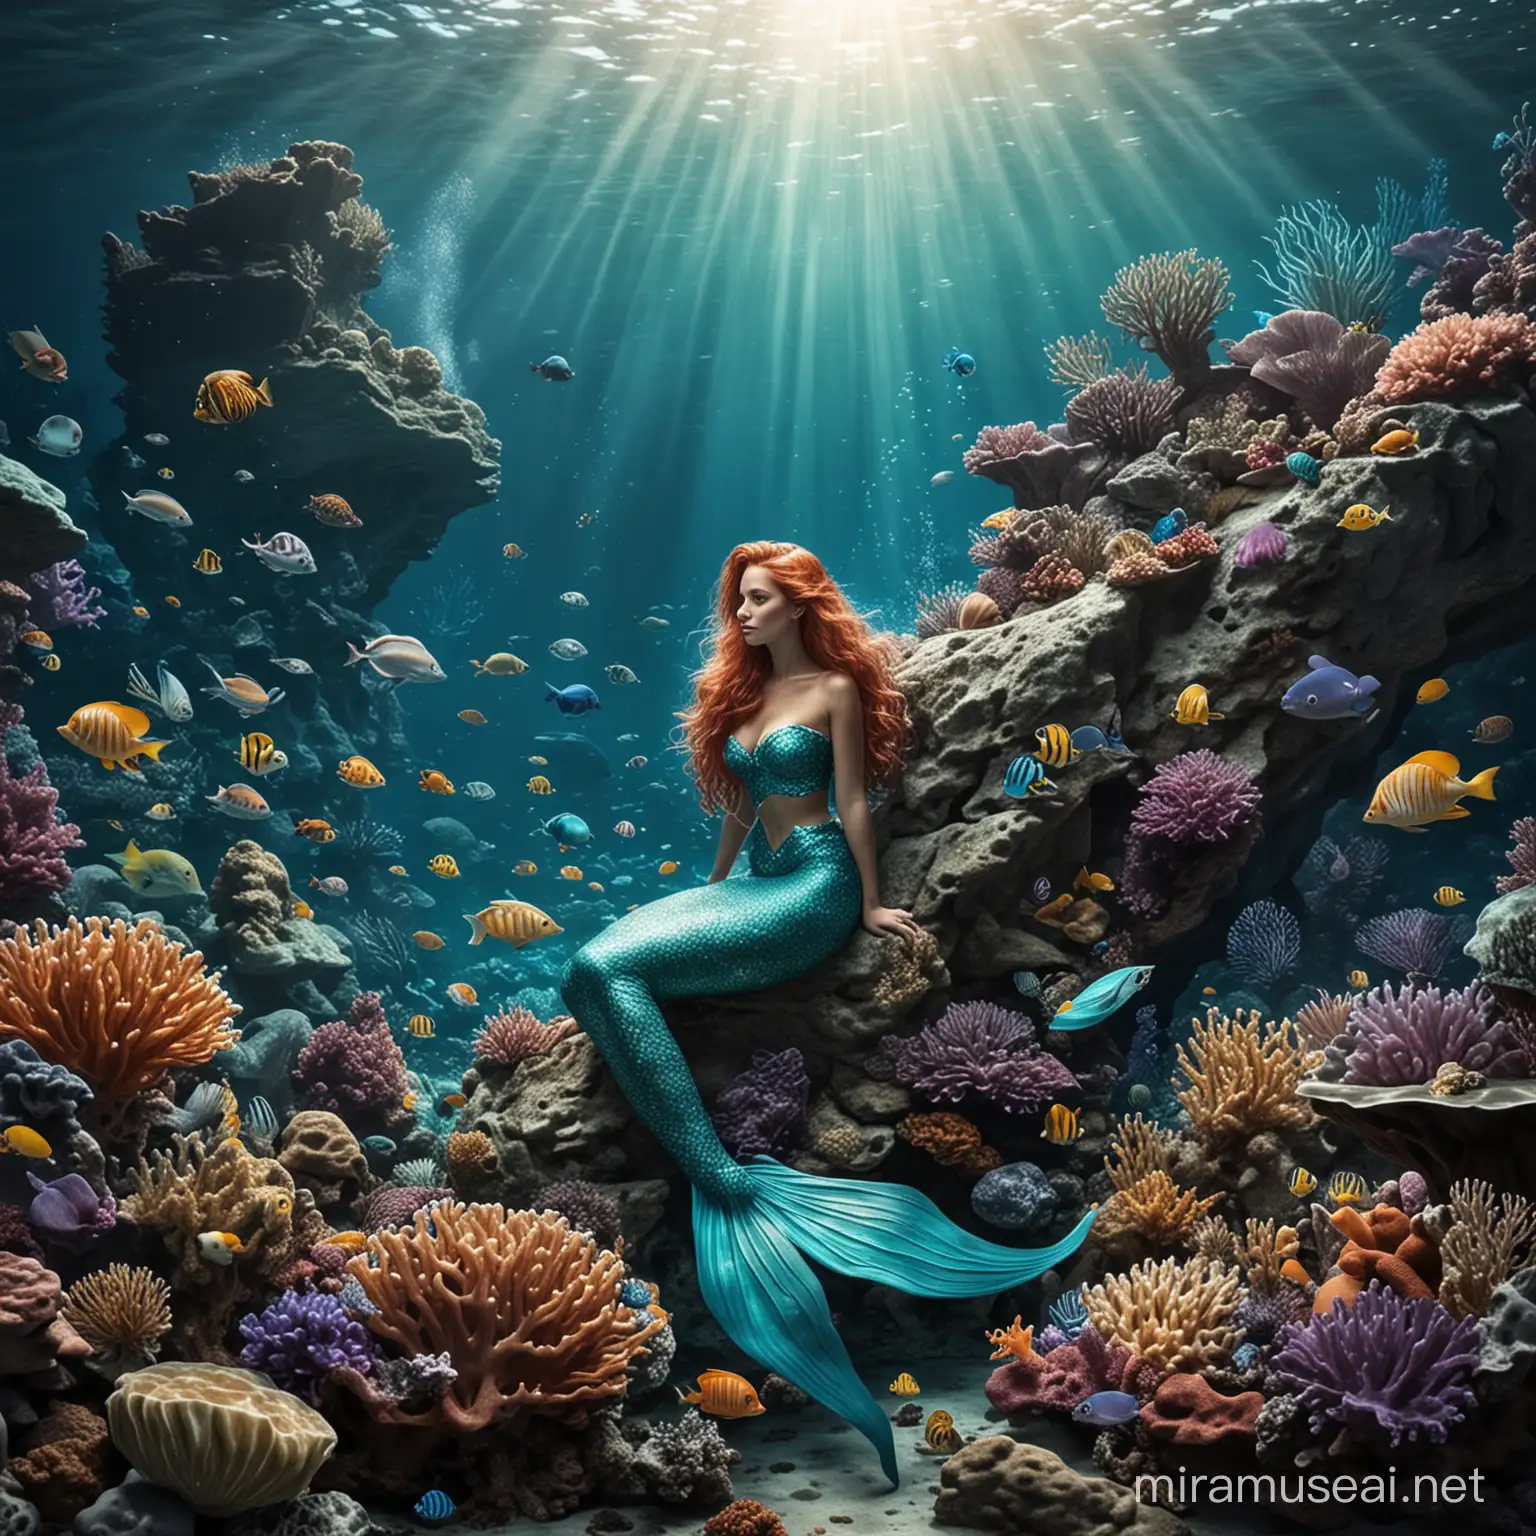 Underwater Mermaid Encounter with Vibrant Sea Life on a Coral